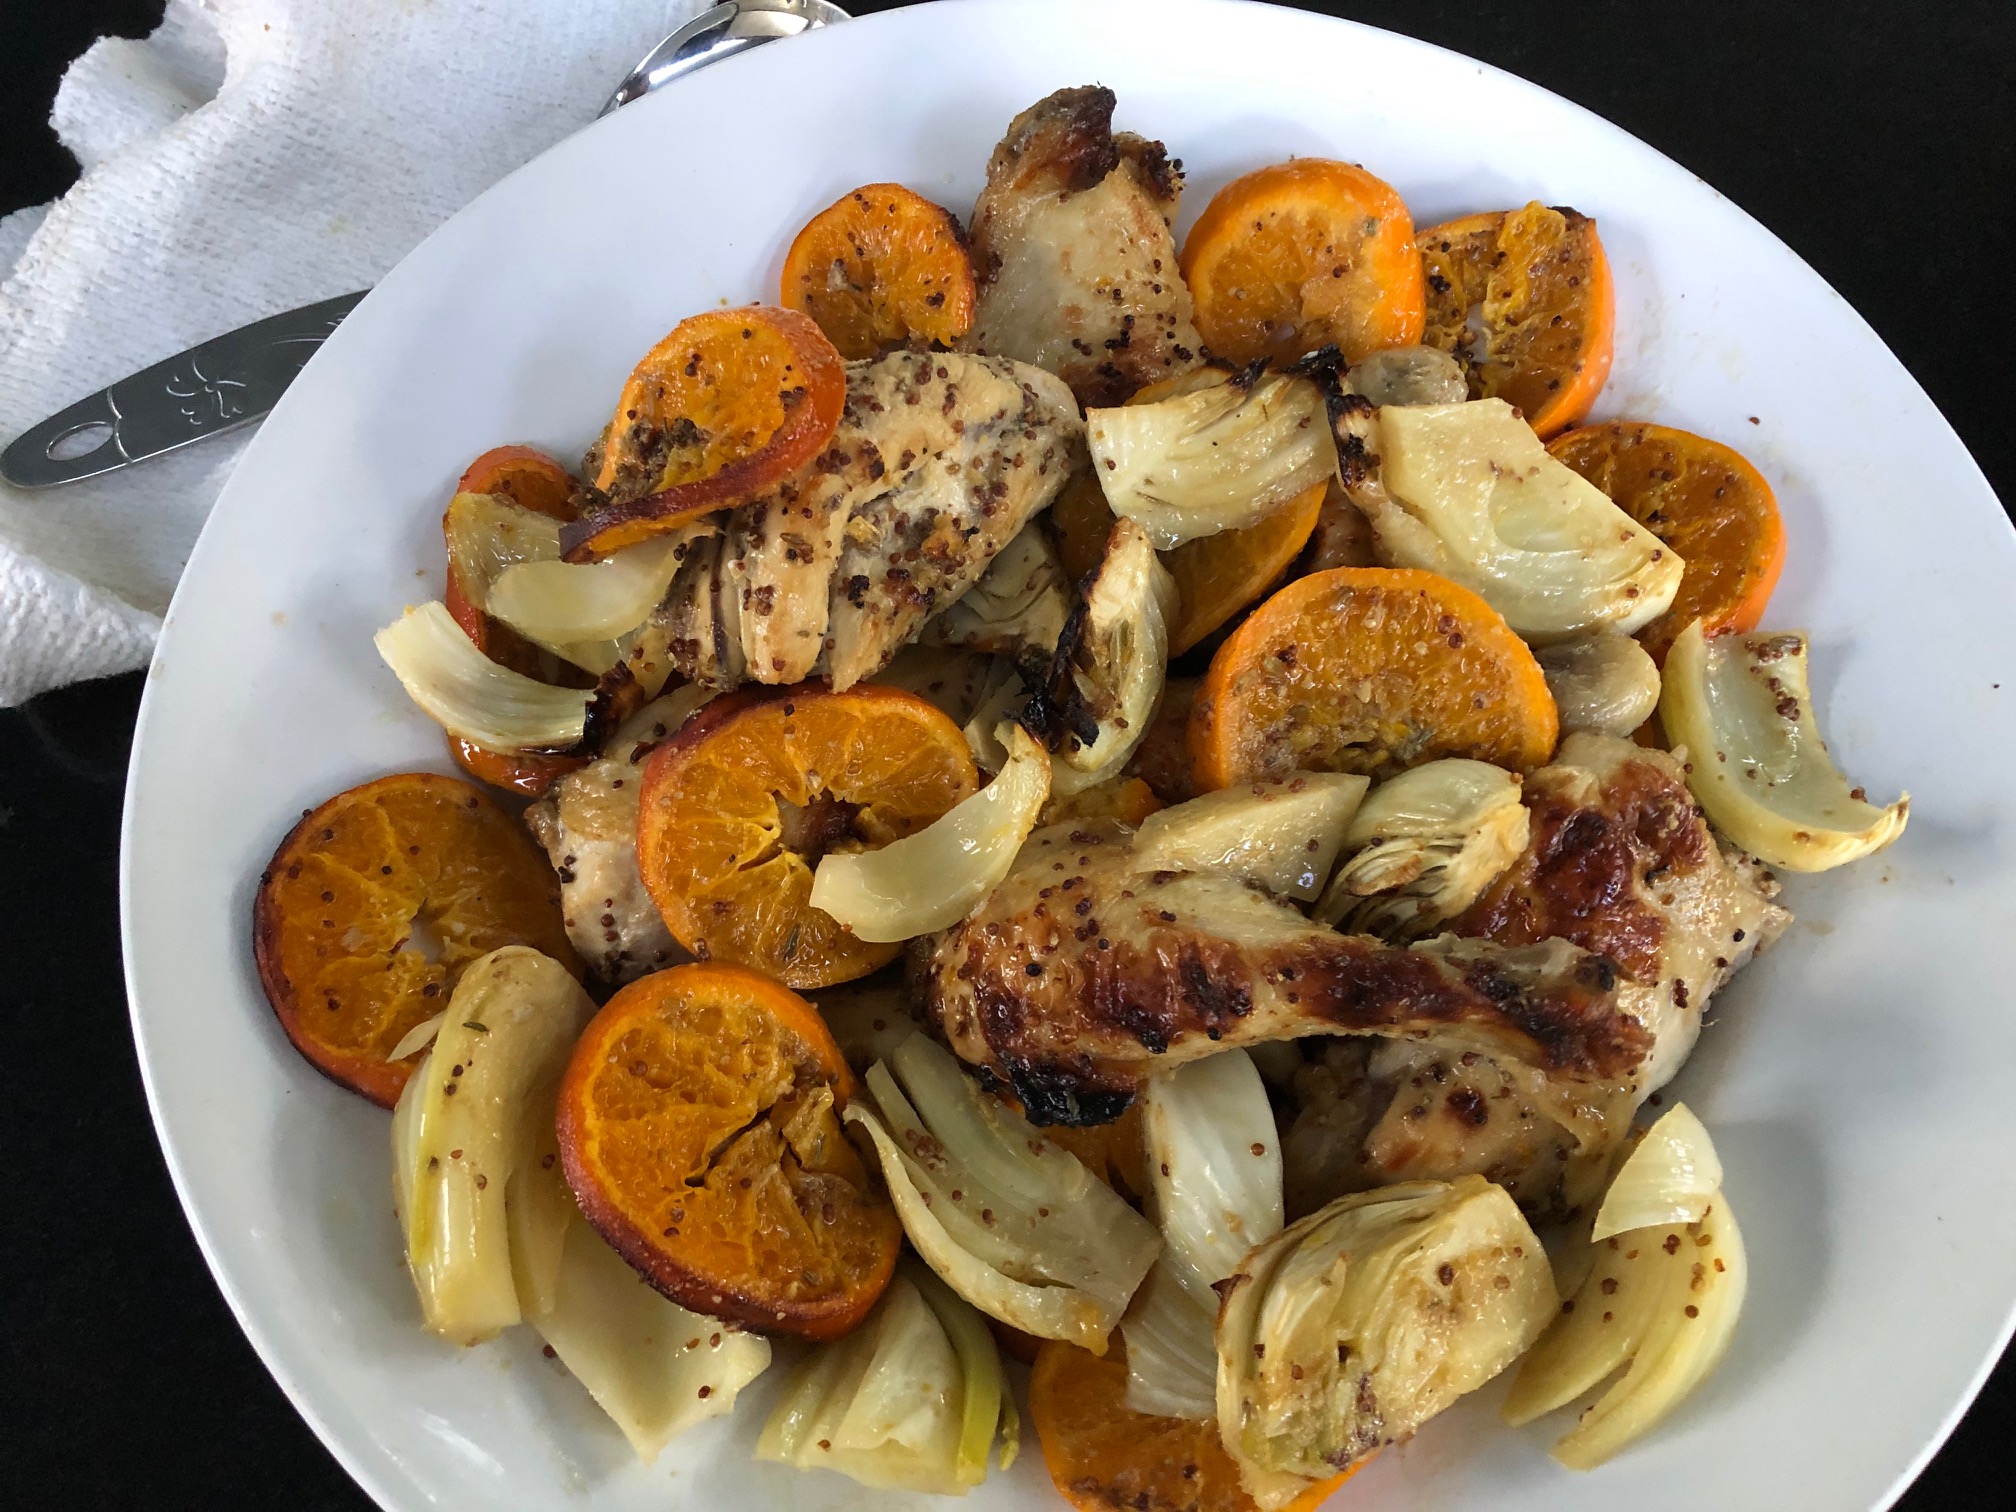 Ottolenghi’s Roast Chicken with Clementines and Arak